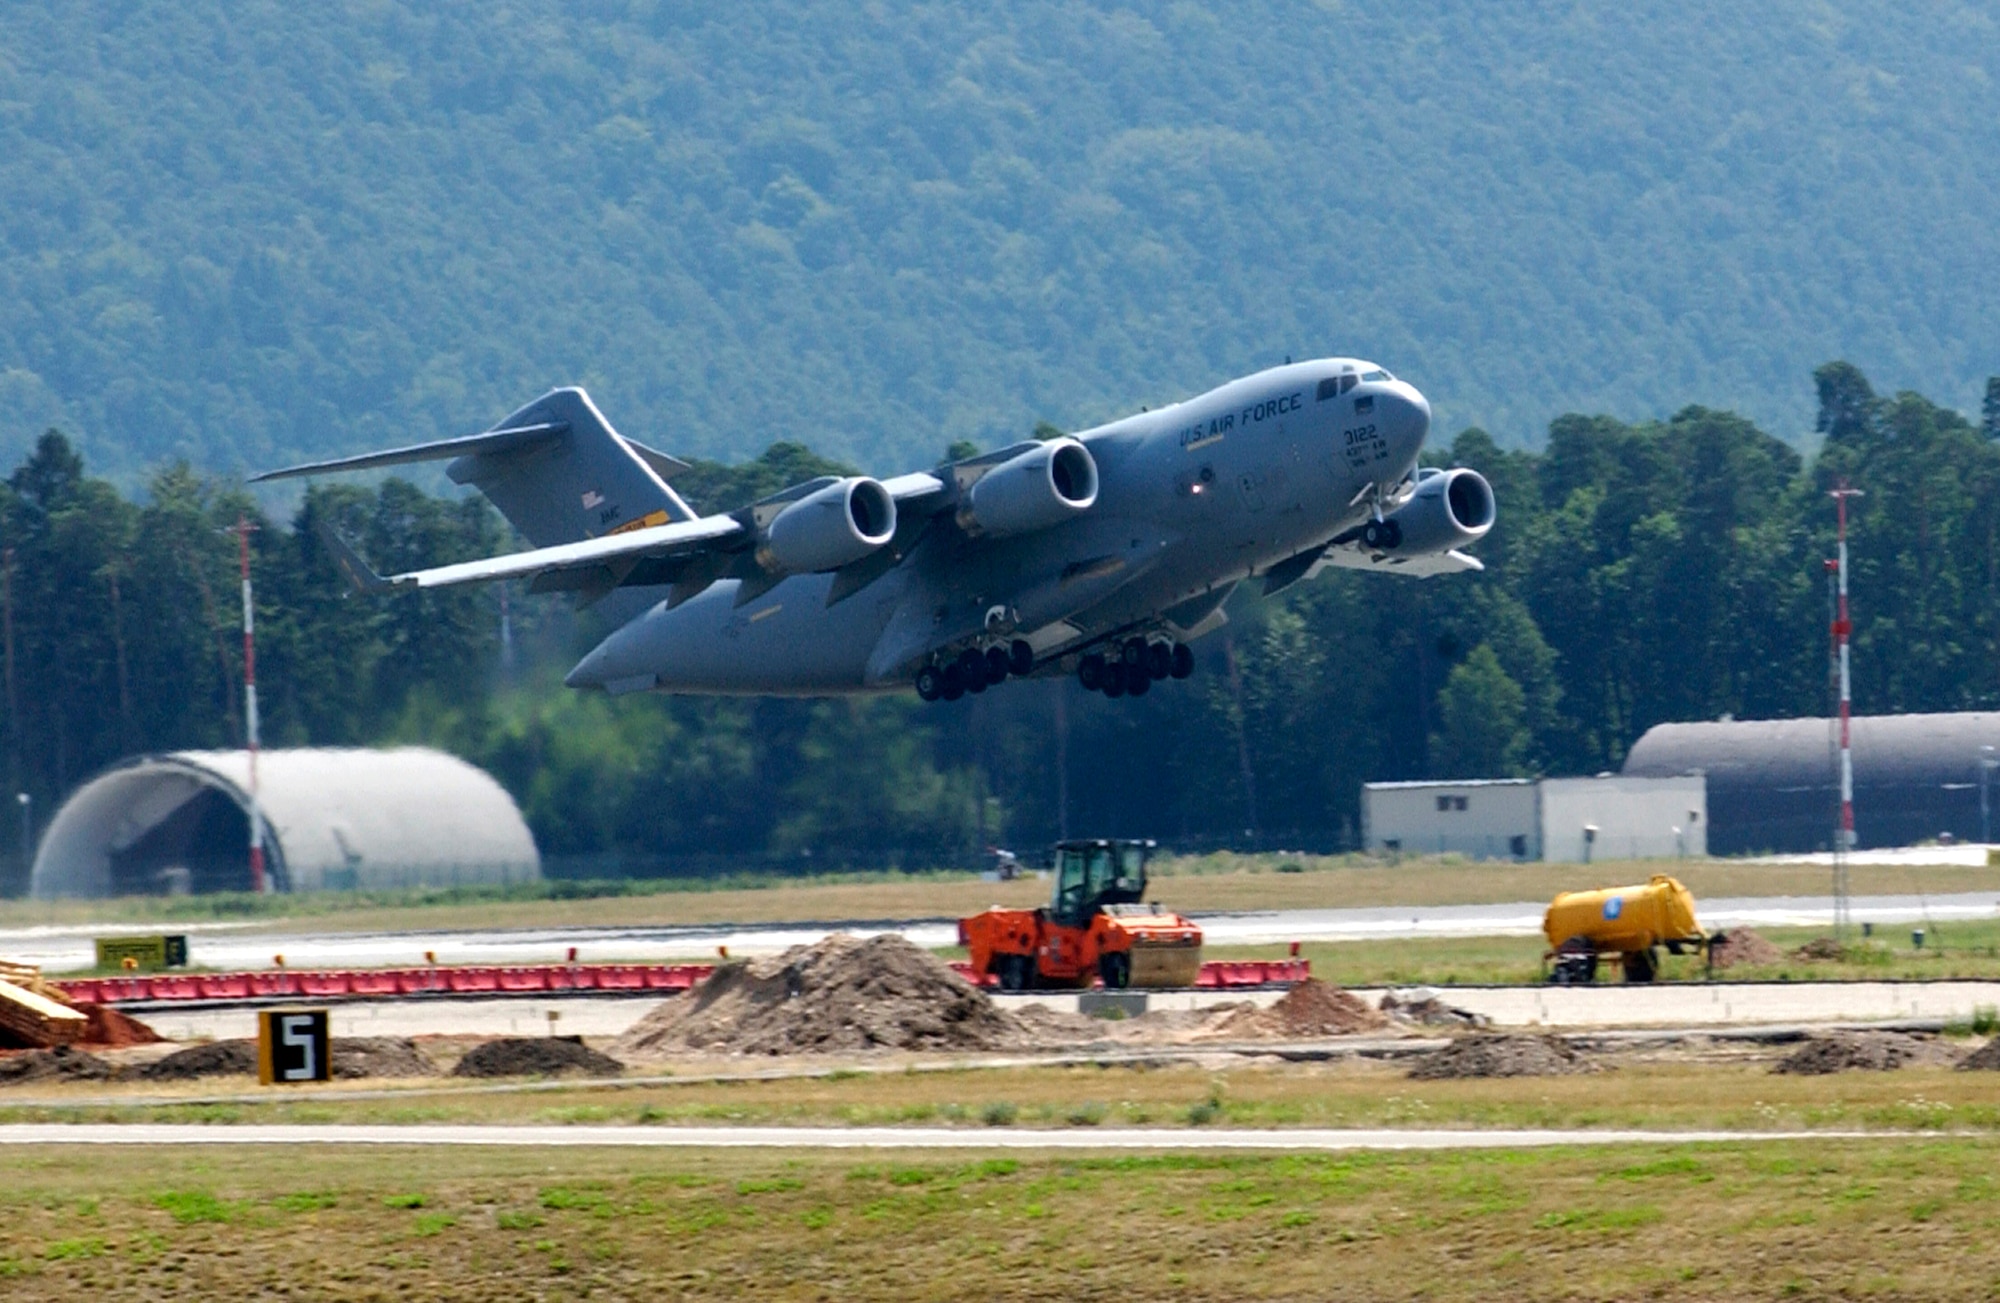 A C-17 Globemaster III takes off from Ramstein Air Base, Germany, on July 23, filled with Americans from Lebanon. Airmen at Ramstein provided humanitarian assistance for American citizens departing the Lebanon crisis on their way to the United States. (U.S. Air Force photo/Staff Sgt. Angela B. Malek)